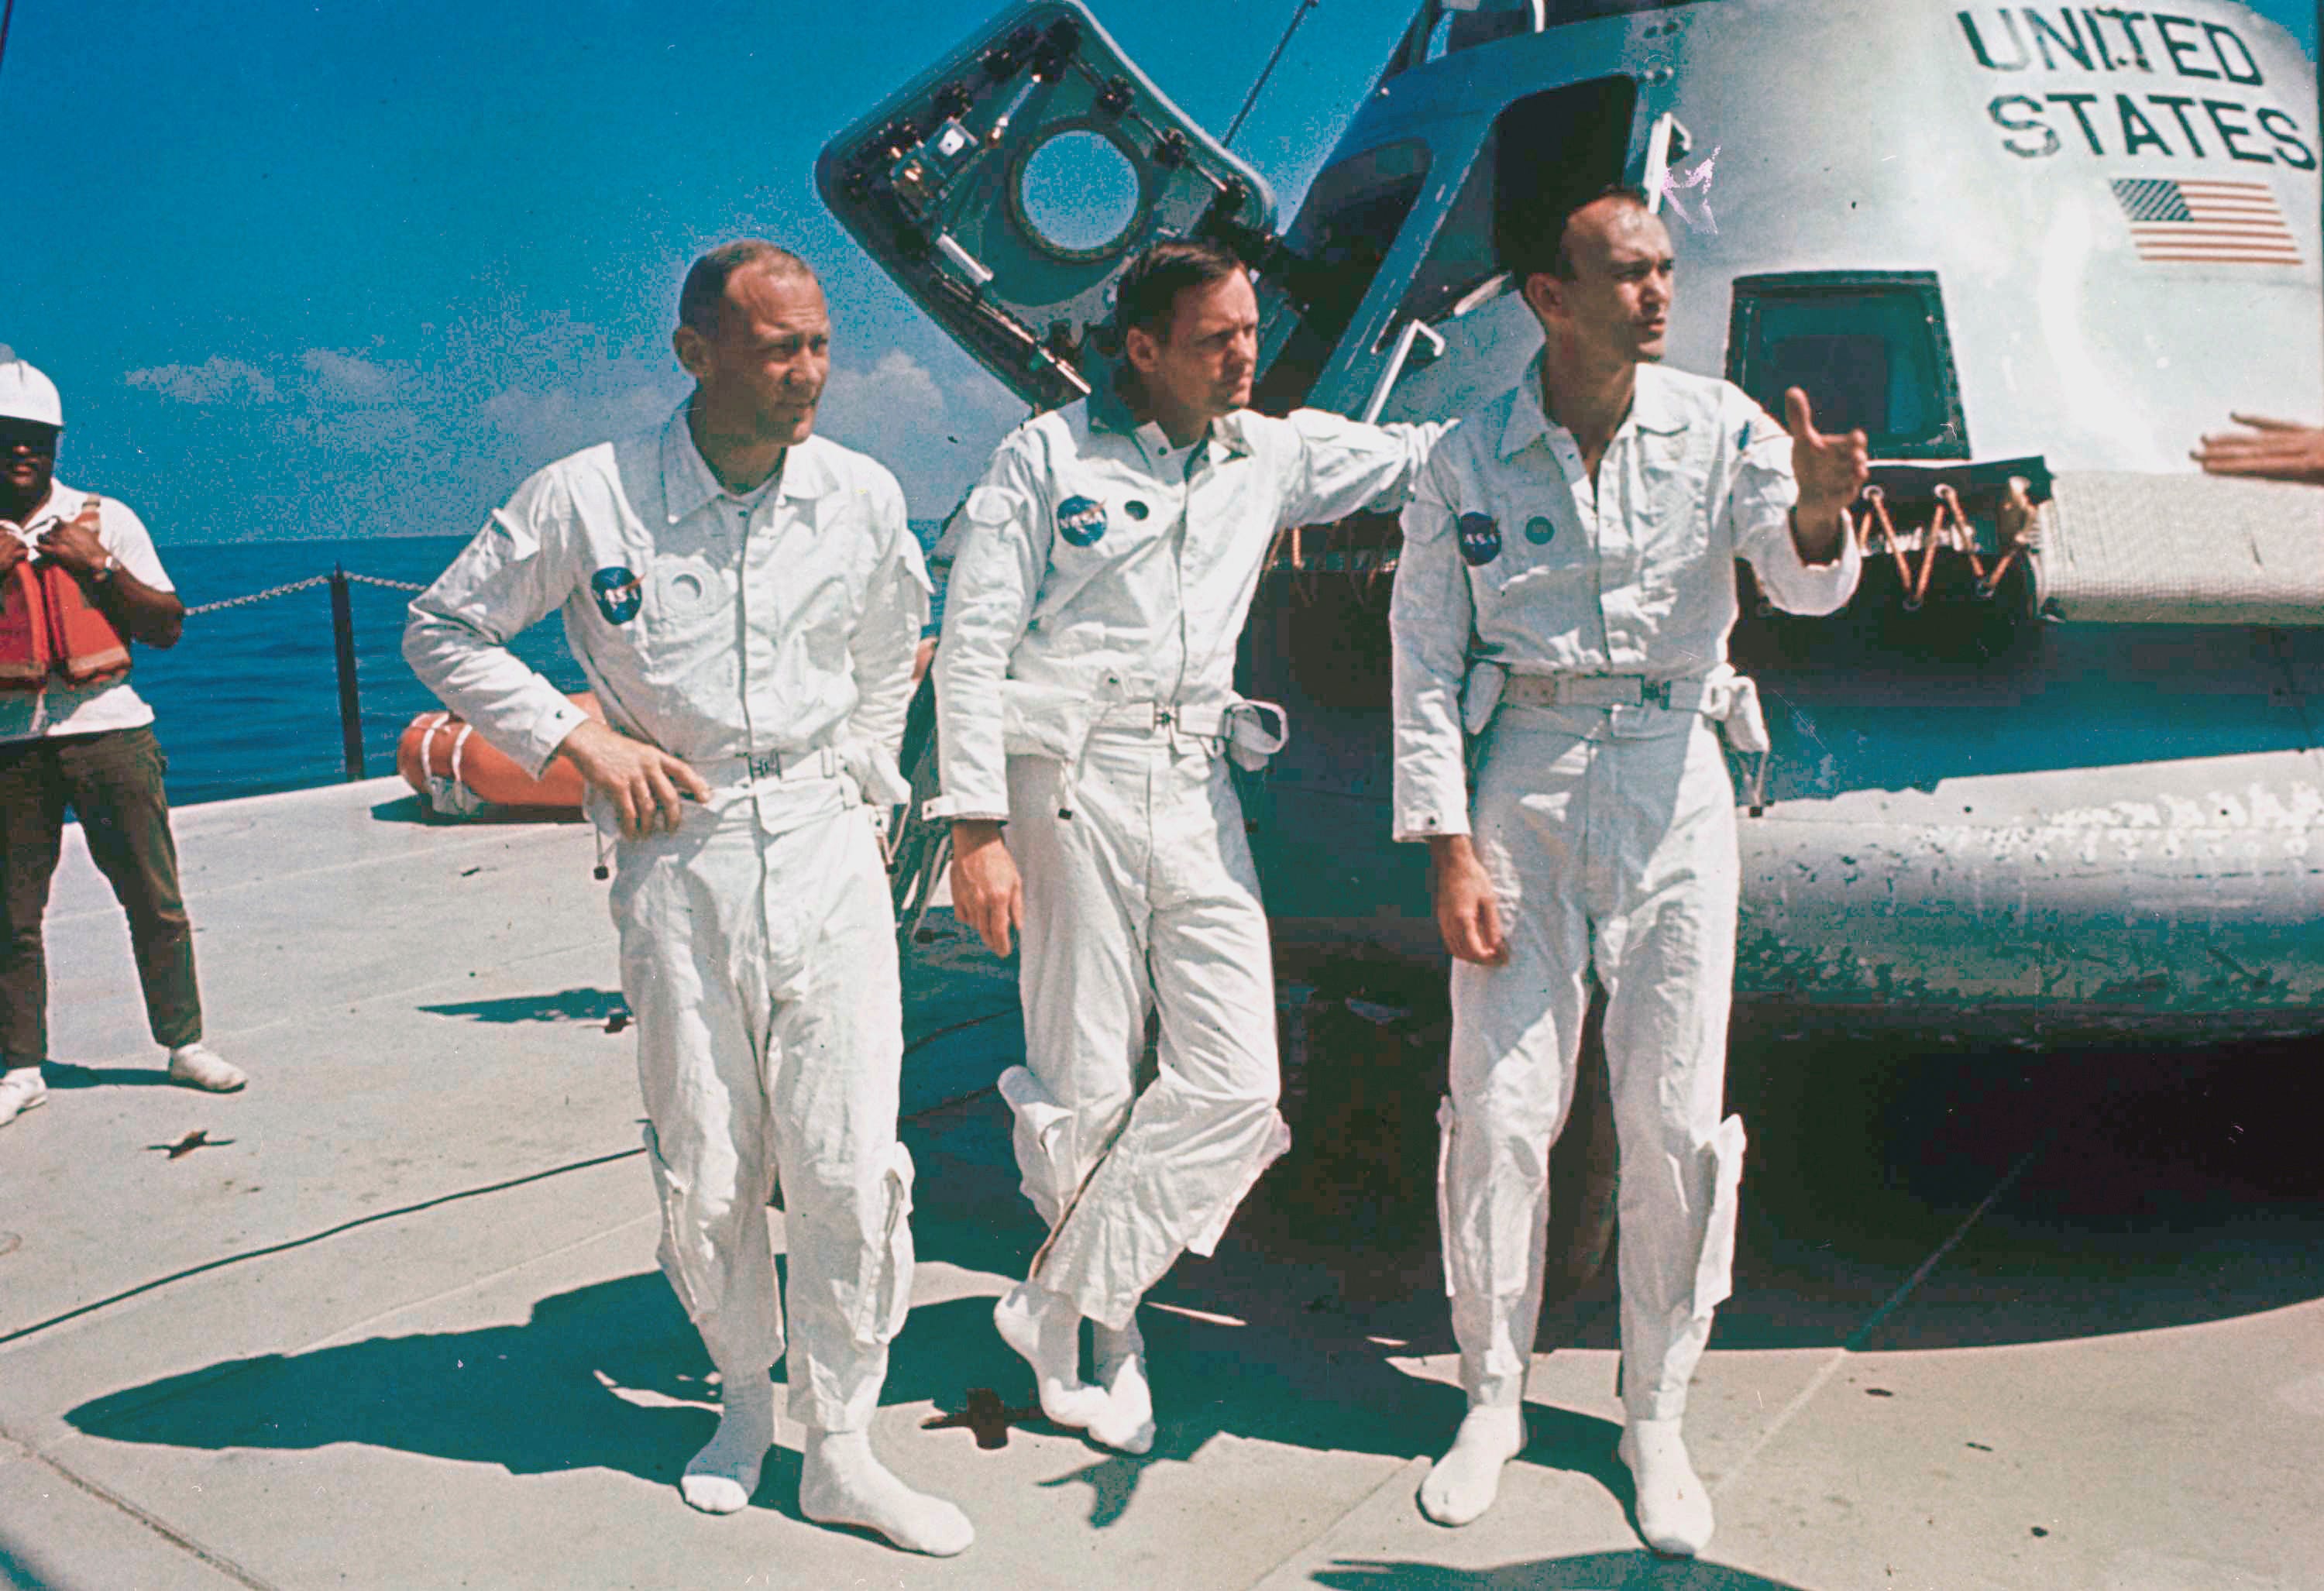 Apollo 11 astronauts stand next to their spacecraft in 1969, from left:  Col. Edwin E. Aldrin, lunar module pilot; Neil Armstrong, flight commander; and Lt. Michael Collins, command module pilot.